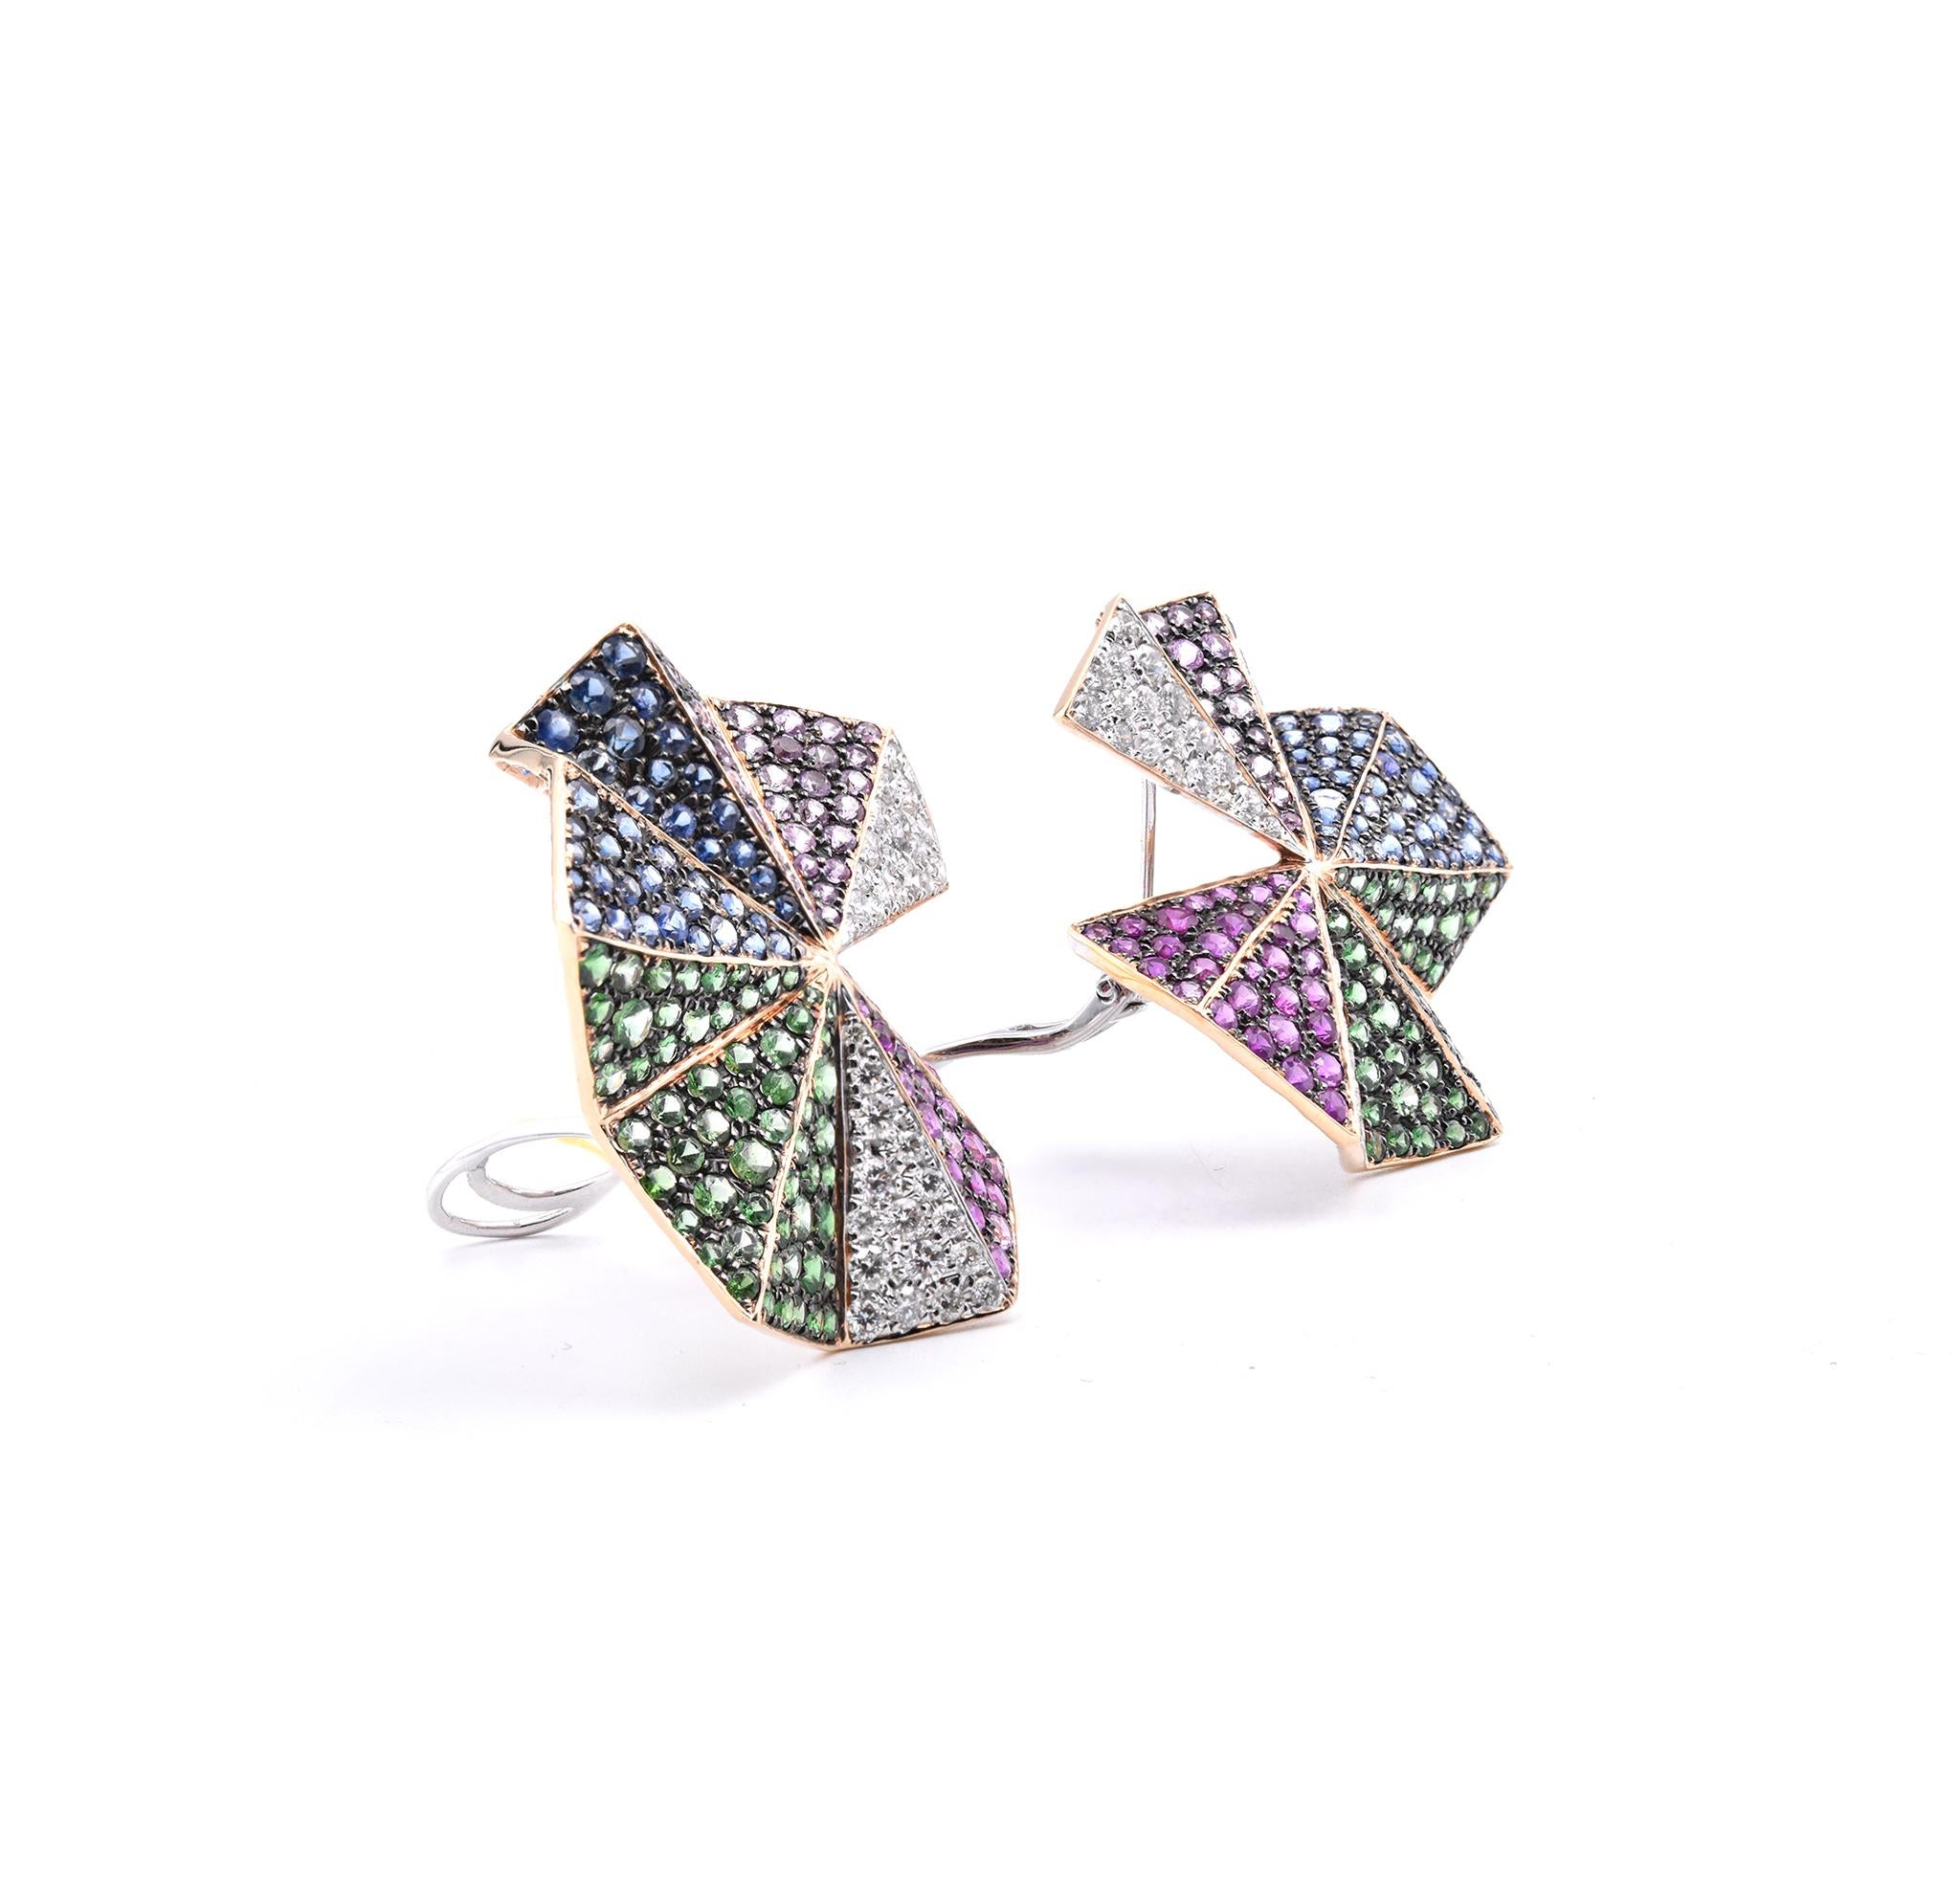 Material: 18K yellow gold
Sapphire: 7.76cttw round cut 
Color: Natural Green, Blue, Purple, Pink
Diamonds: 1.75cttw round cut
Color: G
Clarity: VS
Dimensions: earrings measure 38.3mm long
Fastenings: post with omega back
Weight:  25.07 grams